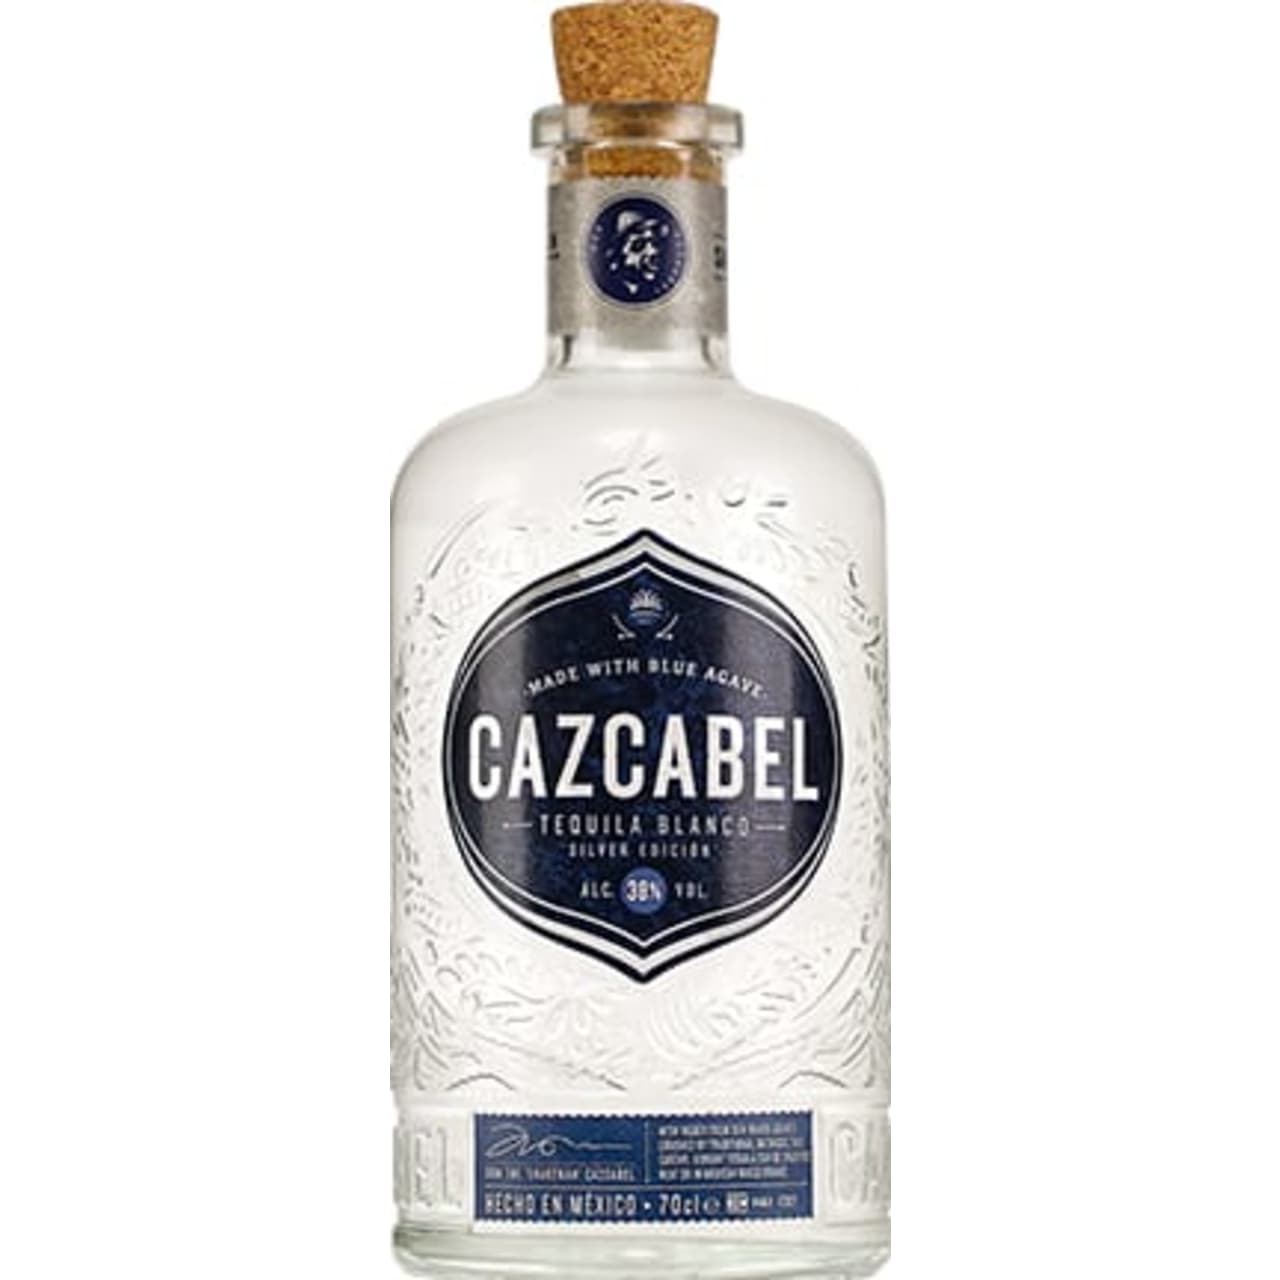 Cazcabel Blanco beautifully balances the Agave's earthy notes with a fresh citrus edge. Spicy, slight hint of citrus with a rustic hit of earthy agave.